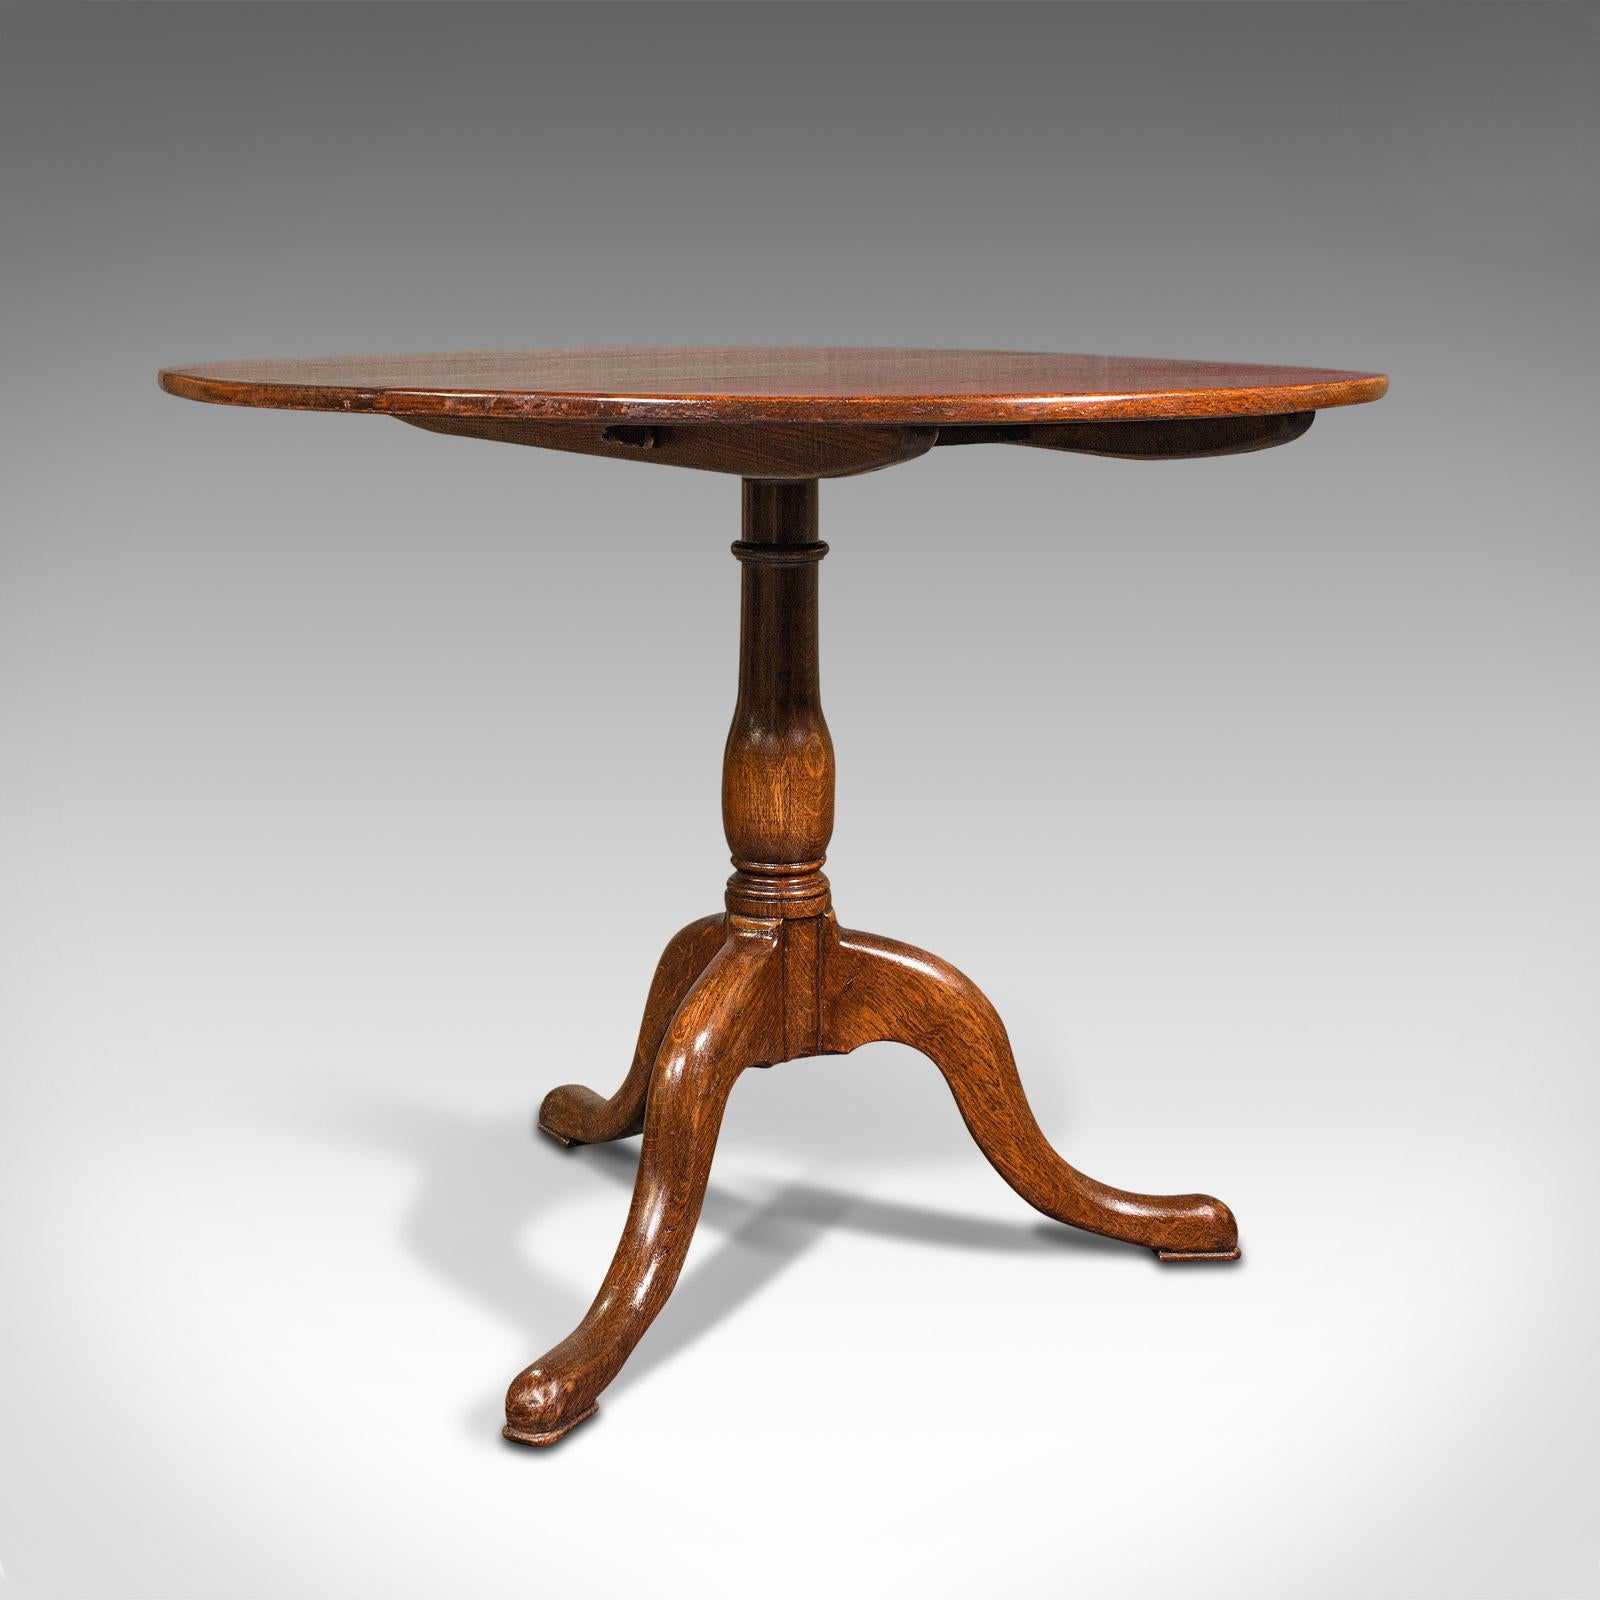 This is an antique tilt top side table. An English, oak occasional or lamp table, dating to the Georgian period, circa 1760.

Enticing Georgian antique appeal and attractive presentation
Displays a desirable aged patina and in good